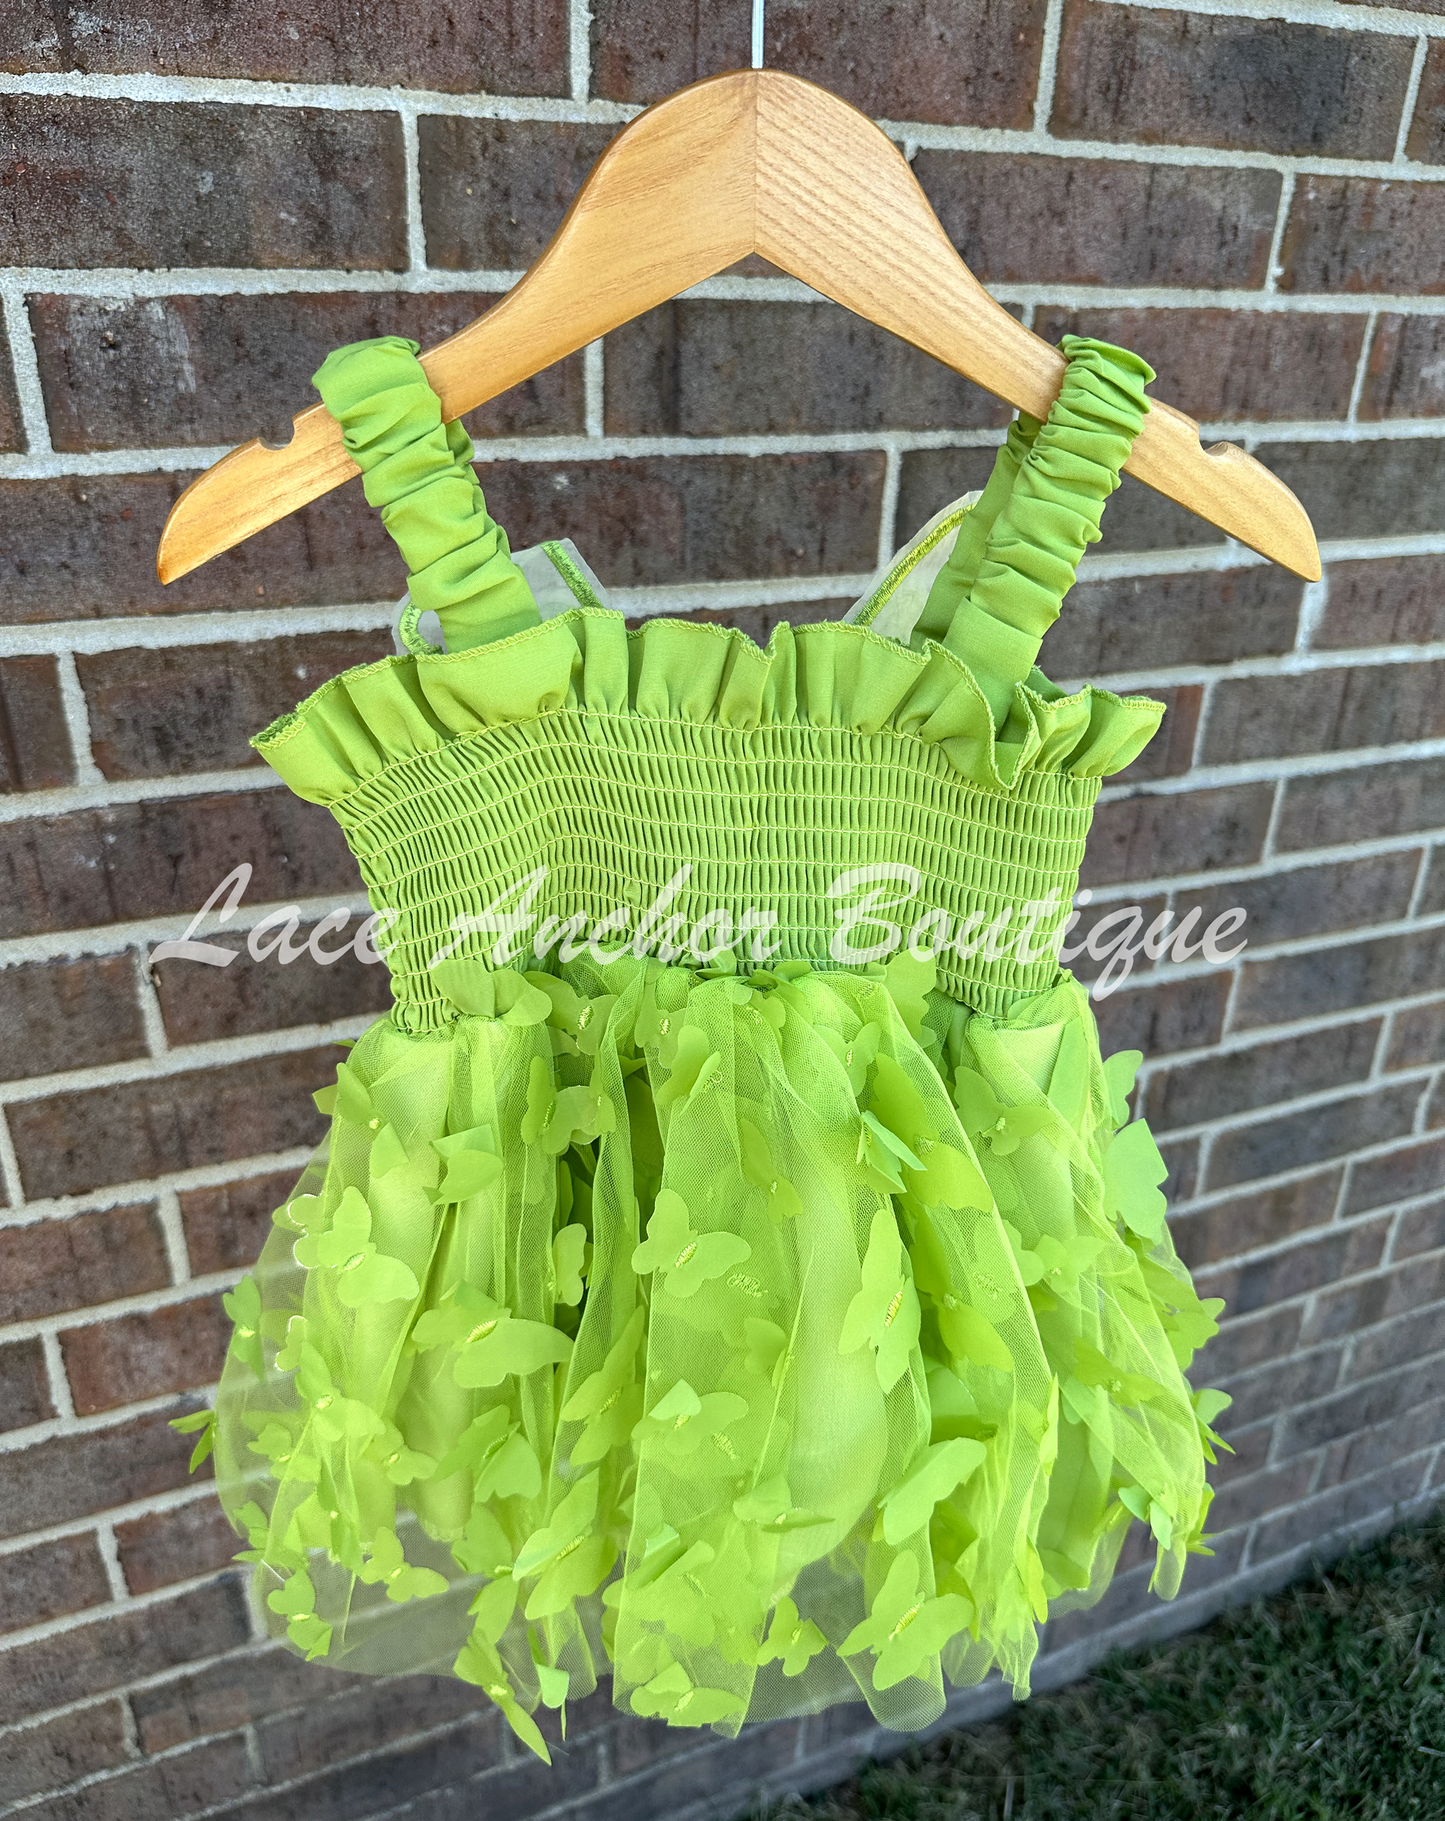 Lime green color girls butterfly wing fairy dress in sage child toddler dress. Has green colored butterflies all over skirt and attached wings.